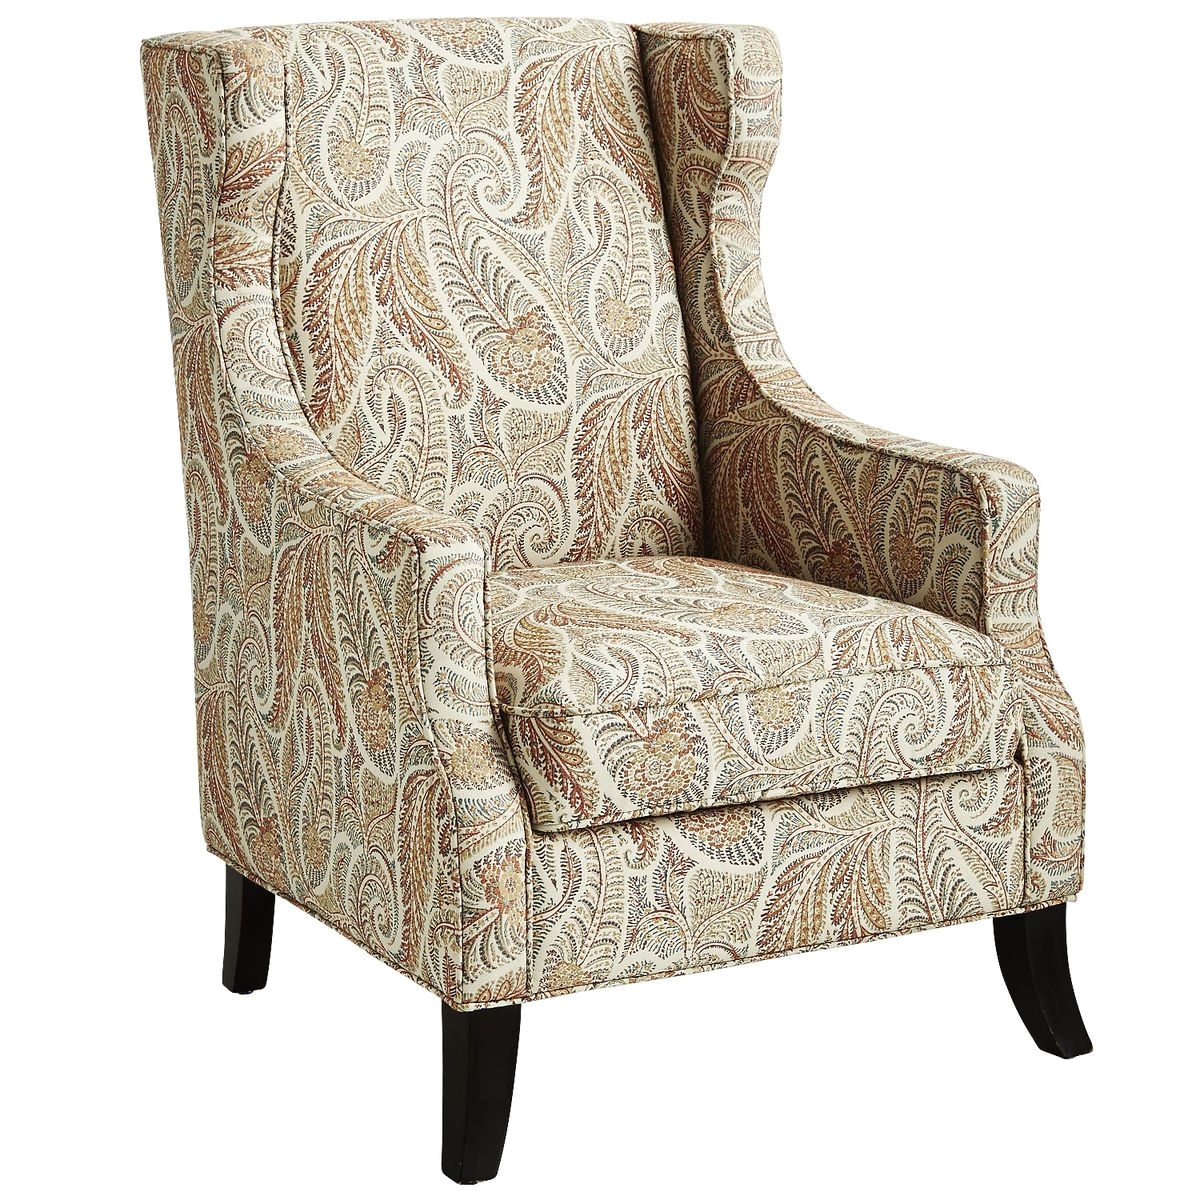 Pier One Swivel Chair Cushion Alec Sunset Paisley Wing Chair Central Heating Chair Fabric and